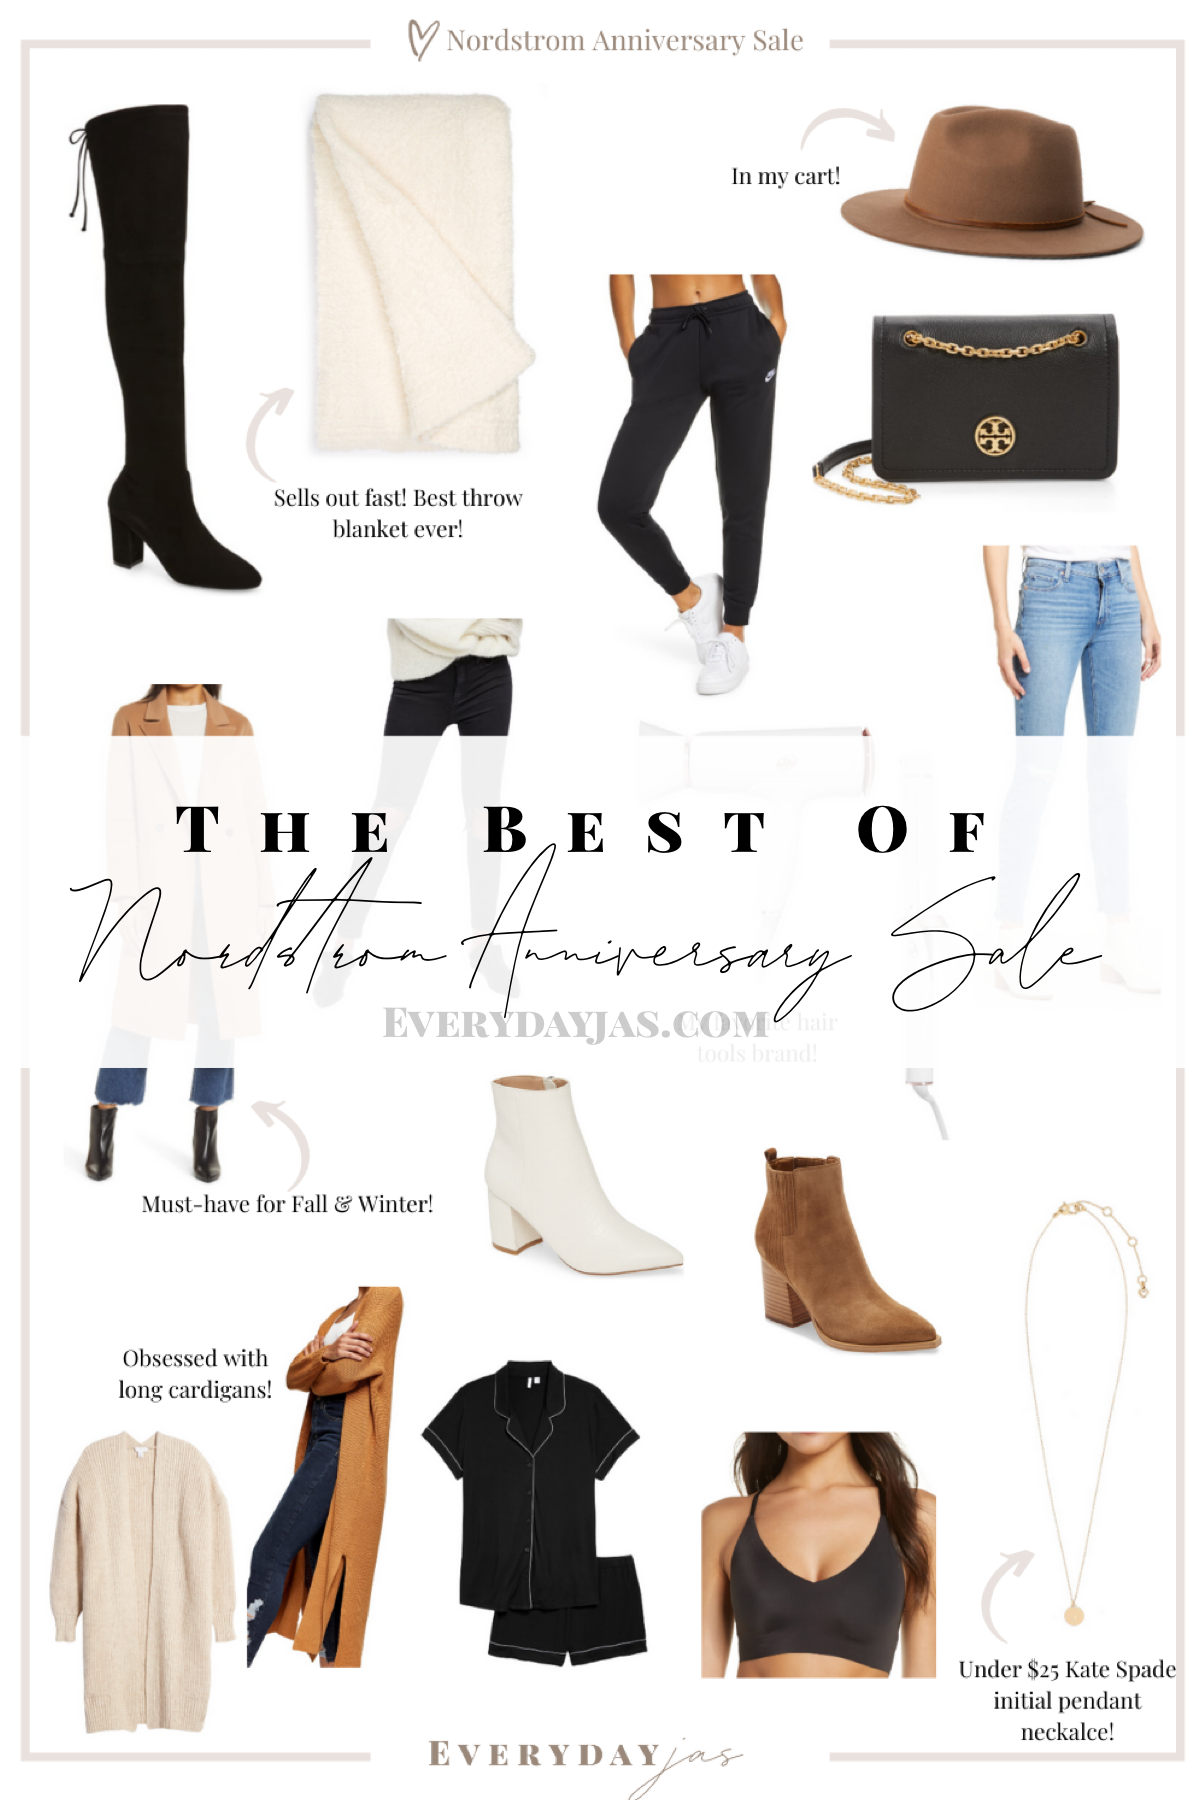 the best of nordstrom anniversary sale